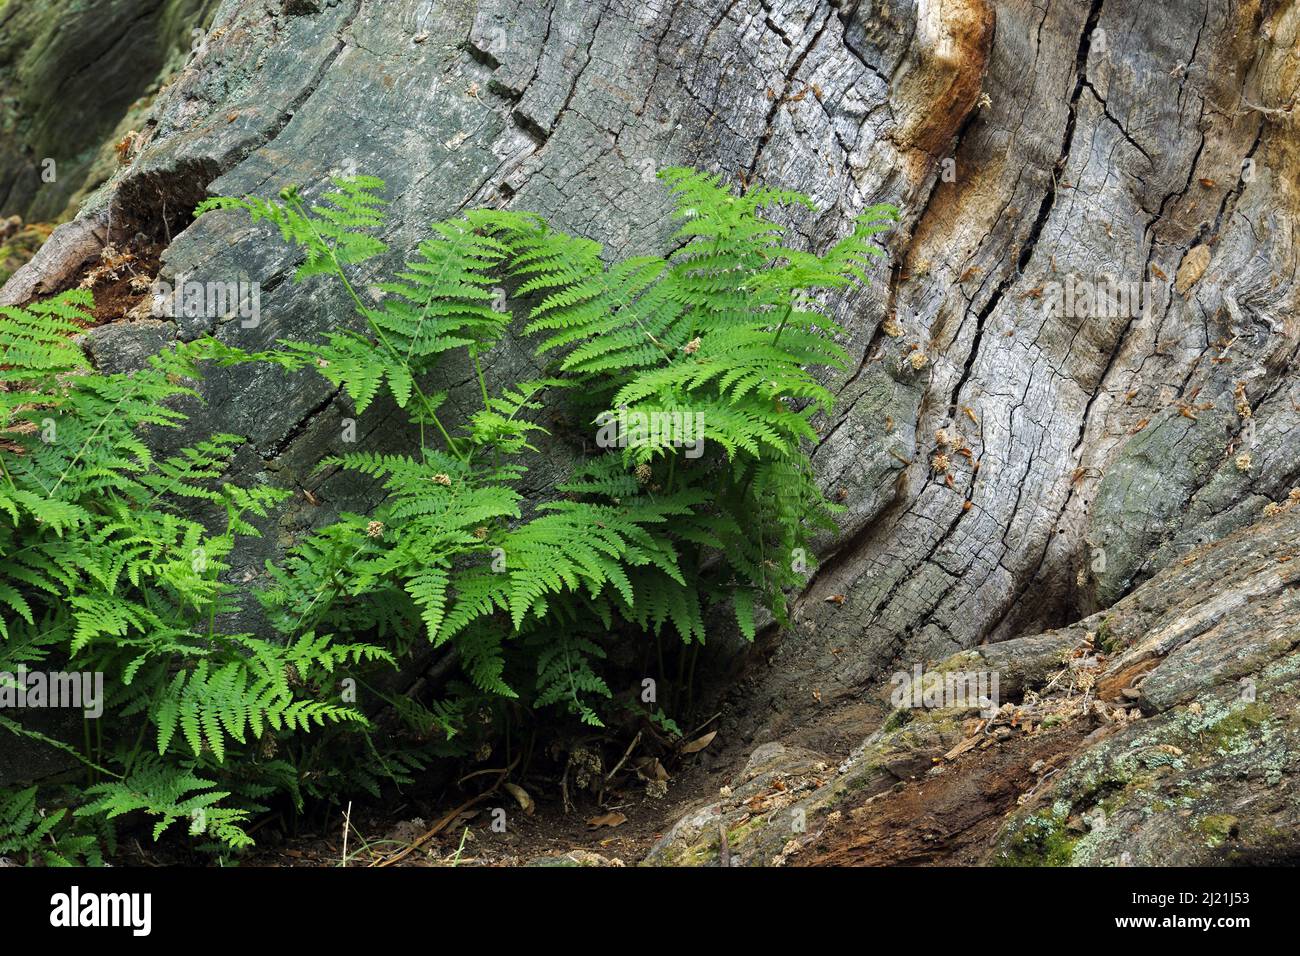 bracken fern (Pteridium aquilinum), Fern grows at a mossy trunk of an old beech at the primeval forest Sababurg, Germany, Hesse Stock Photo